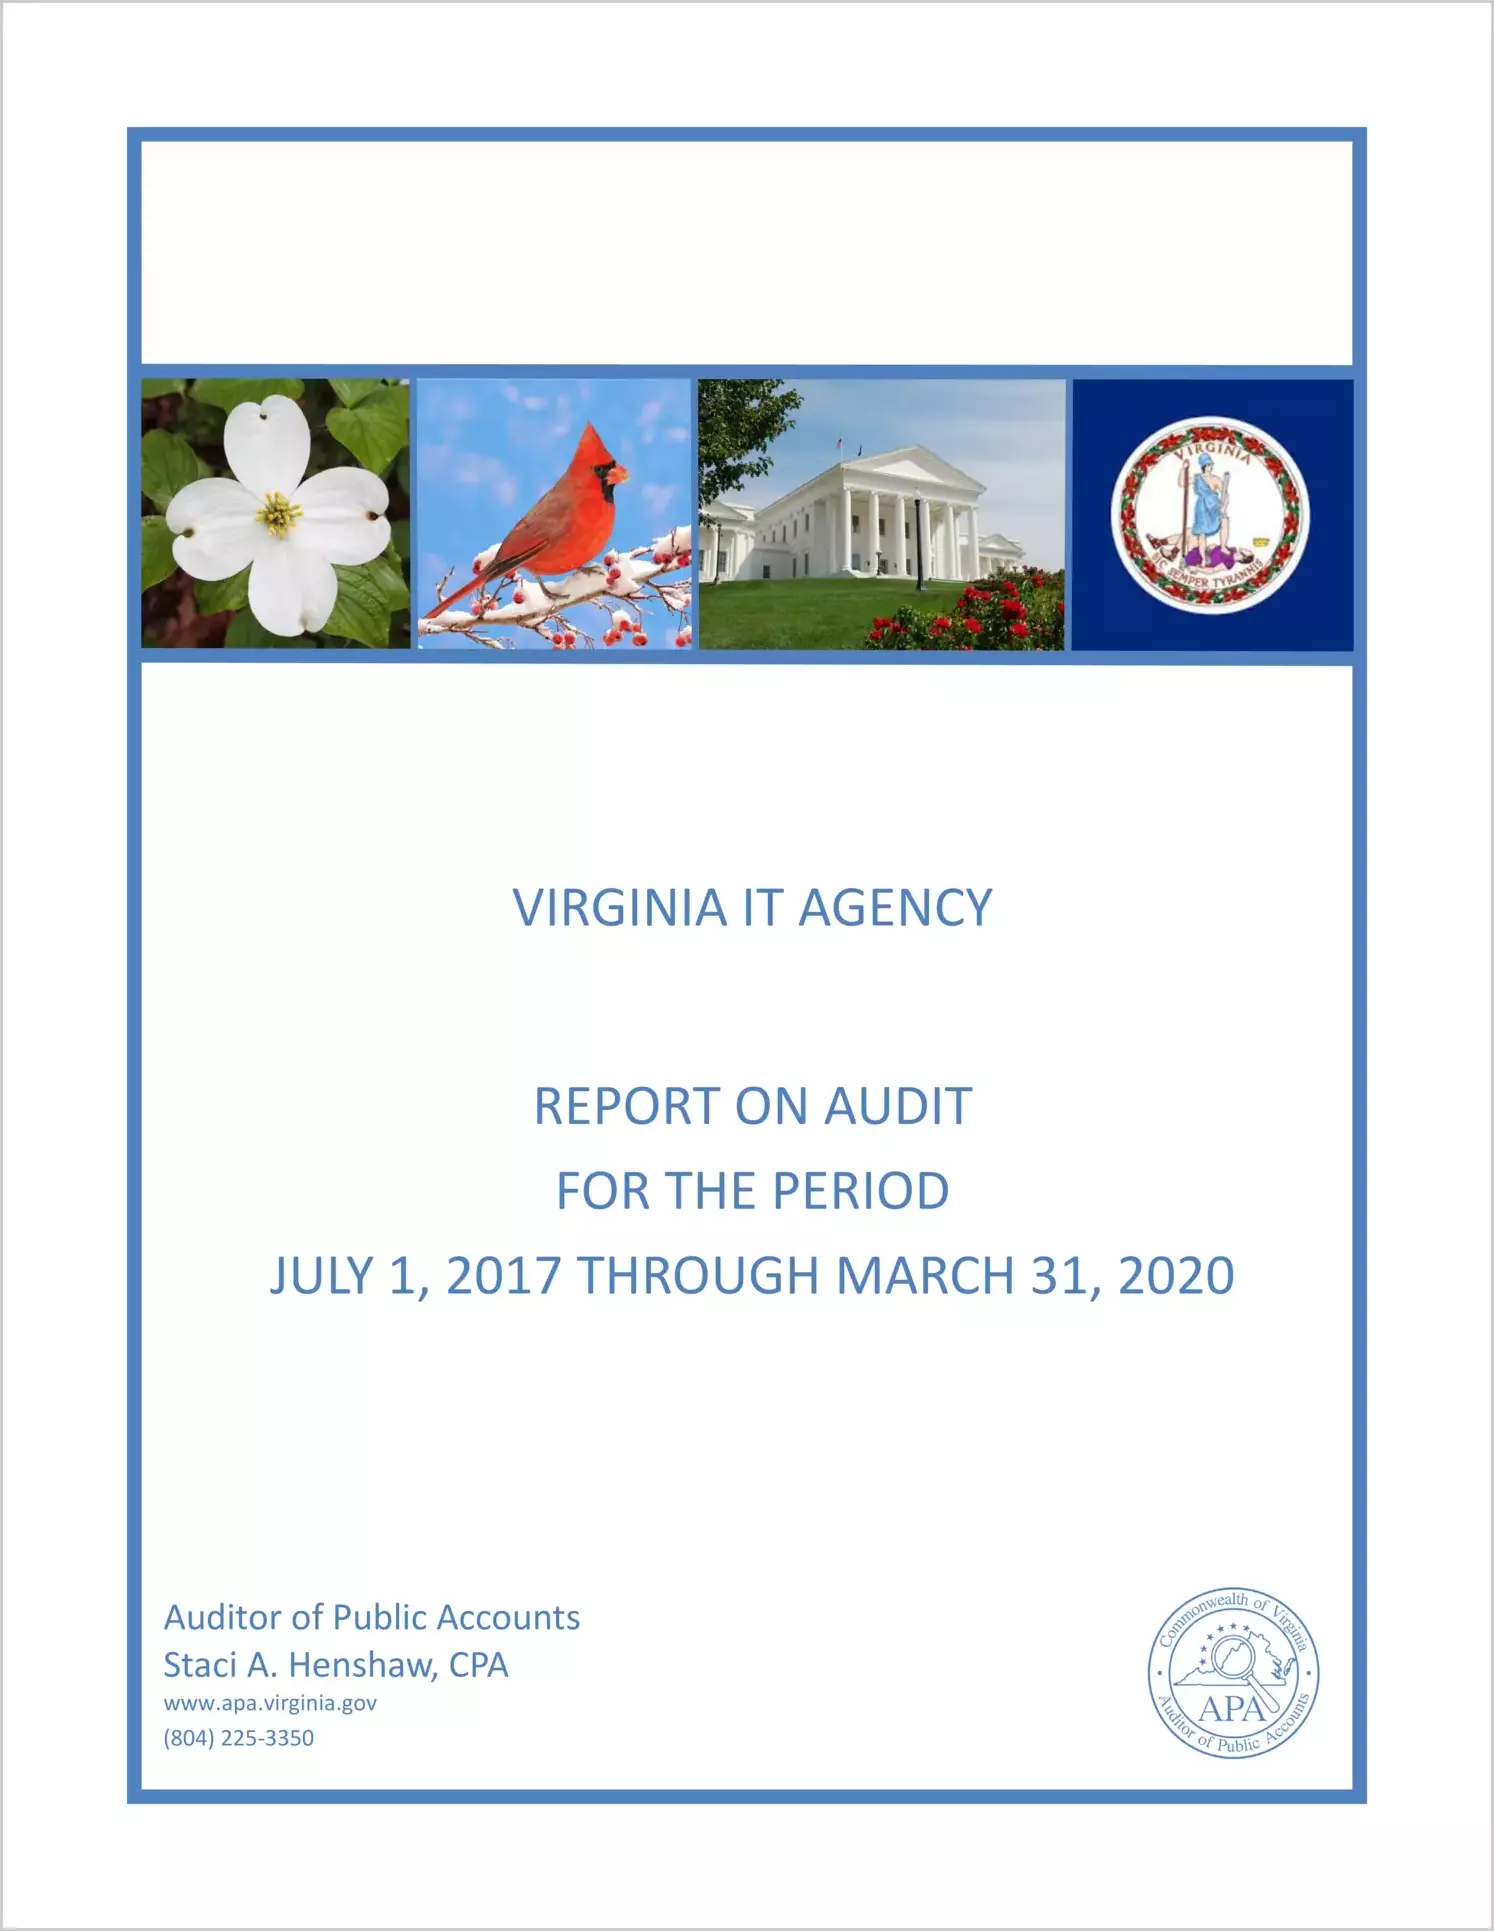 Virginia IT Agency for the period July 1, 2017 through March 31, 2020